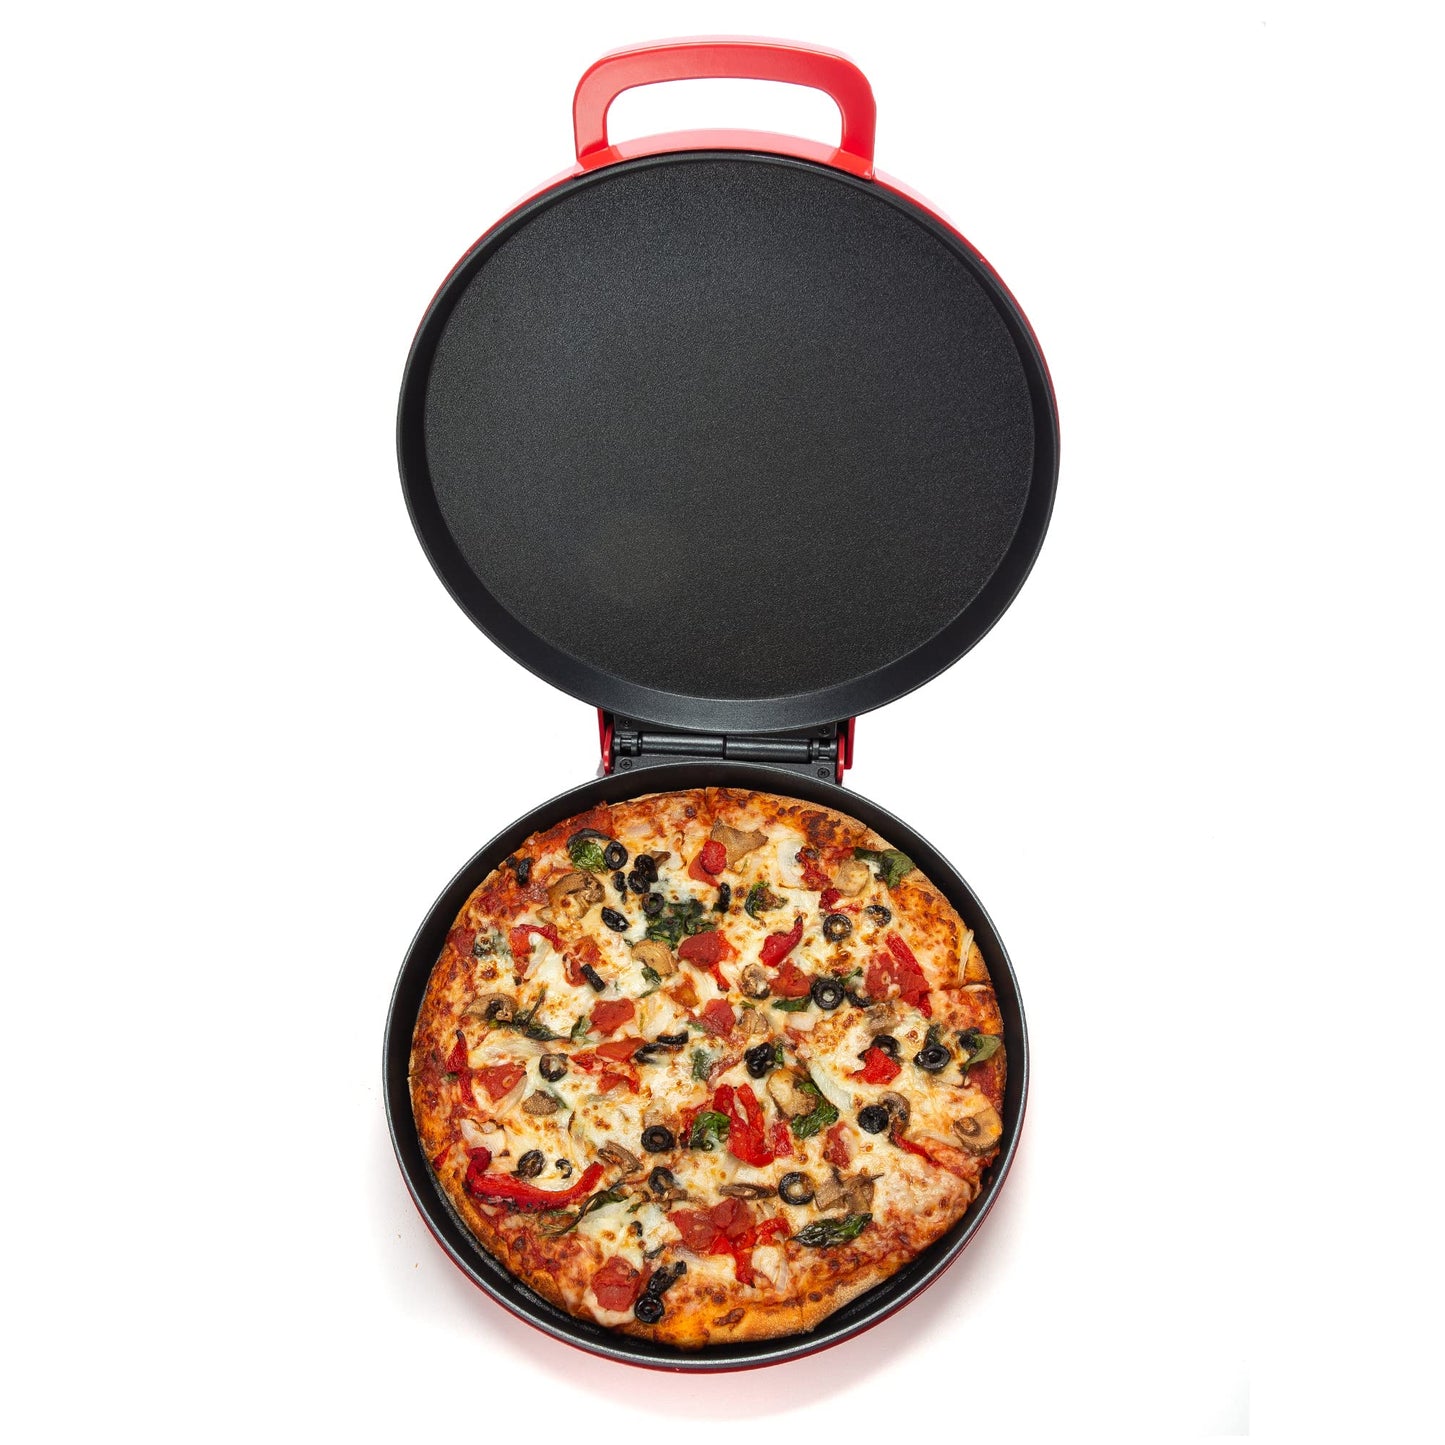 Zenith Versa Grill Non-Stick Pizza Maker Machine For Home, Calzone Maker, Pizza Oven Converts to Electric indoor Grill, Red